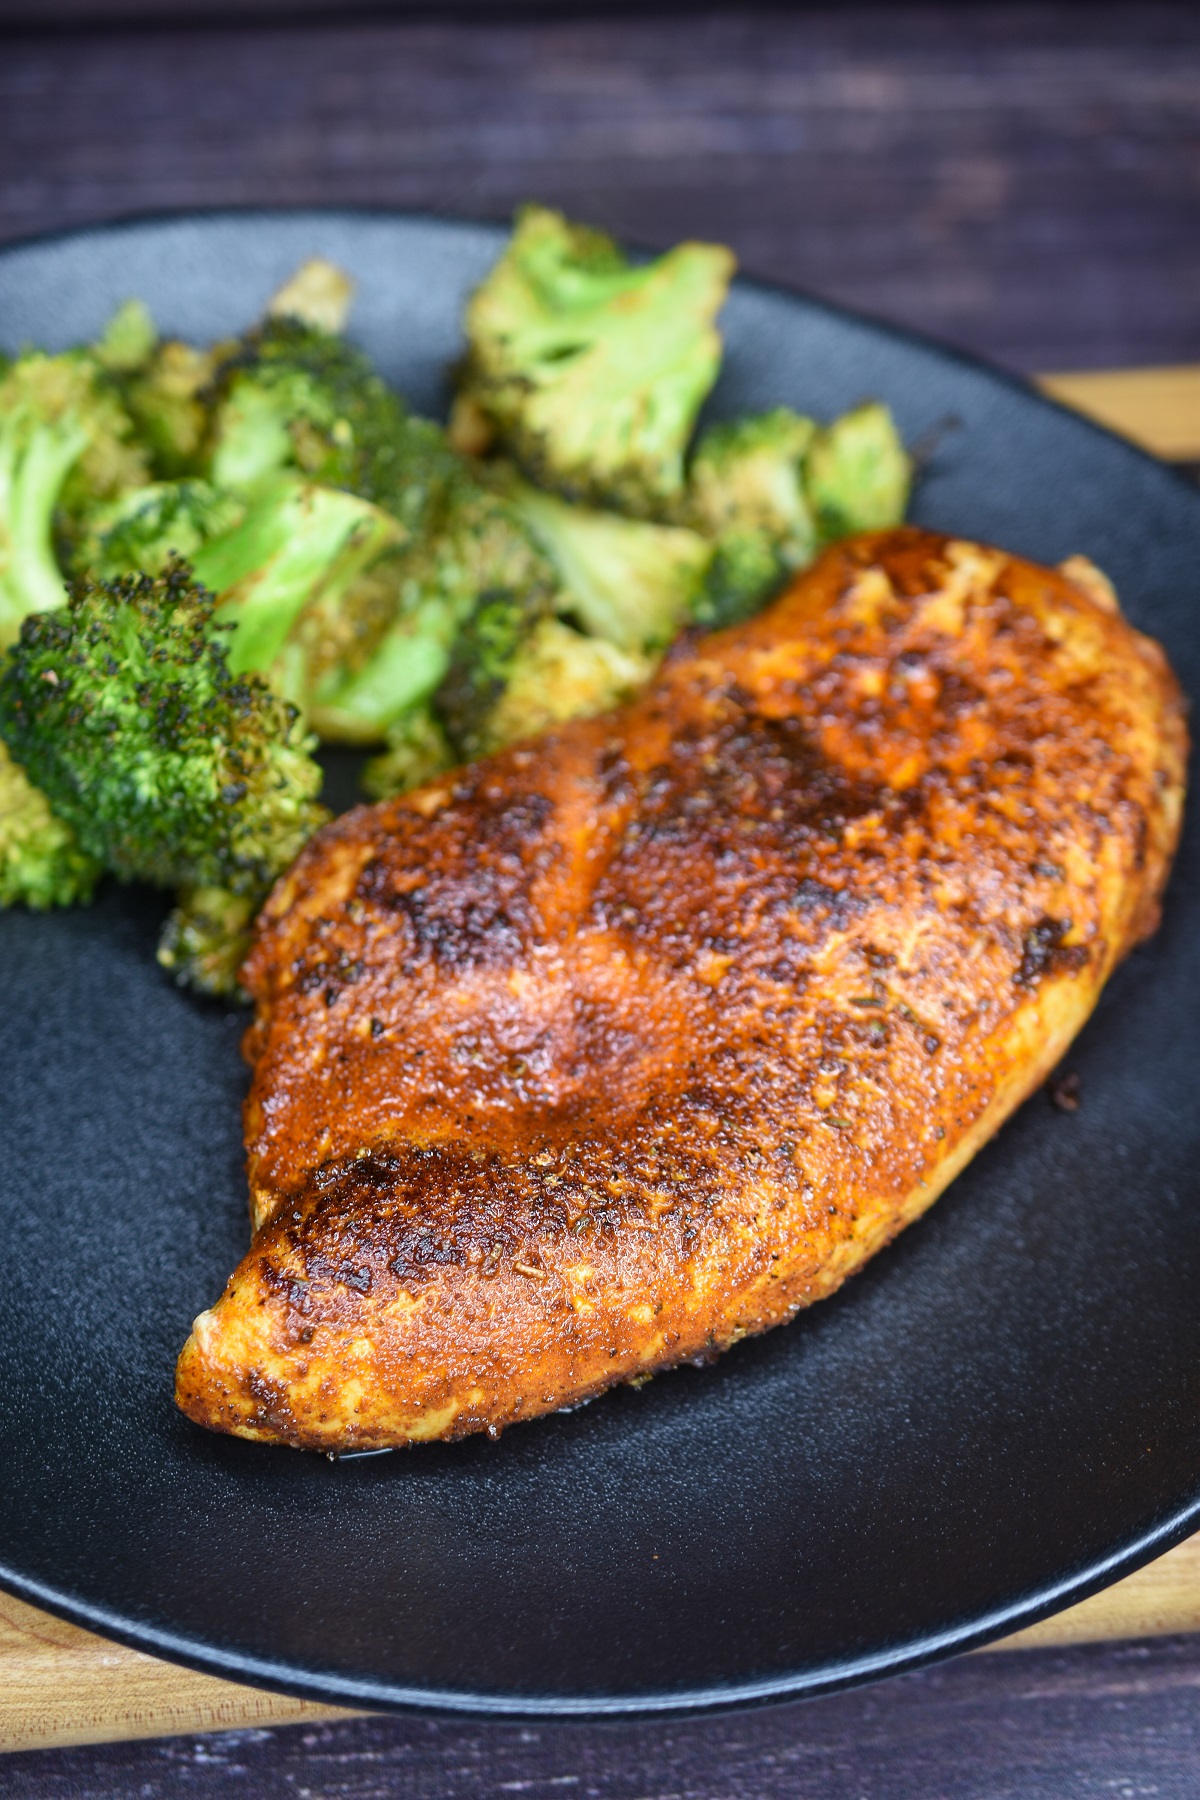 Blackened Chicken with Air Fried Broccoli